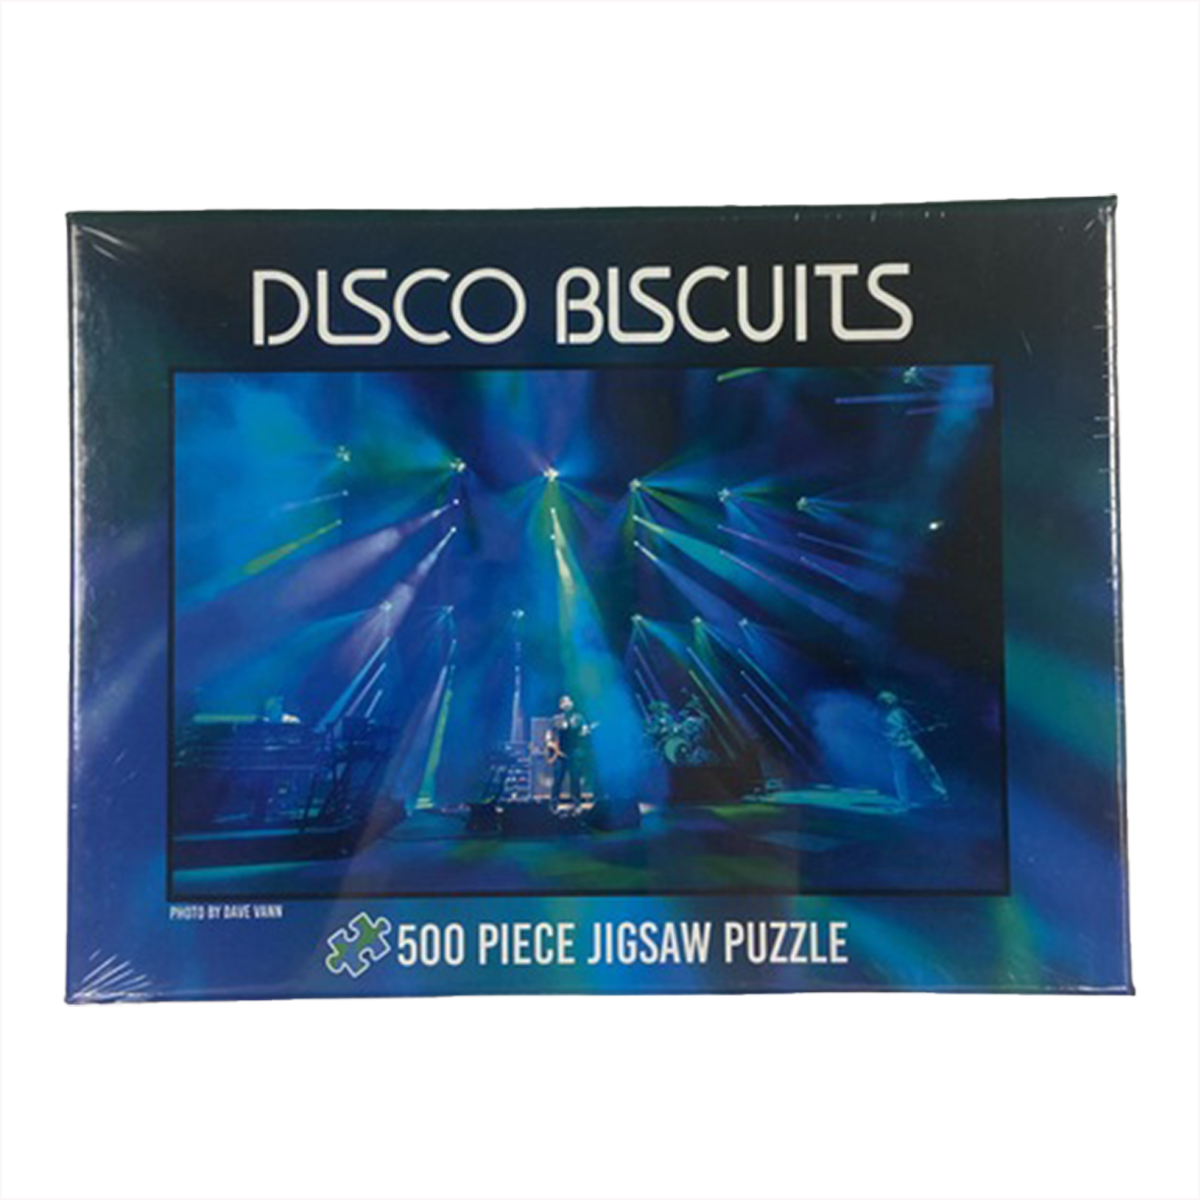 Disco Biscuits 500 Piece Jigsaw Puzzle